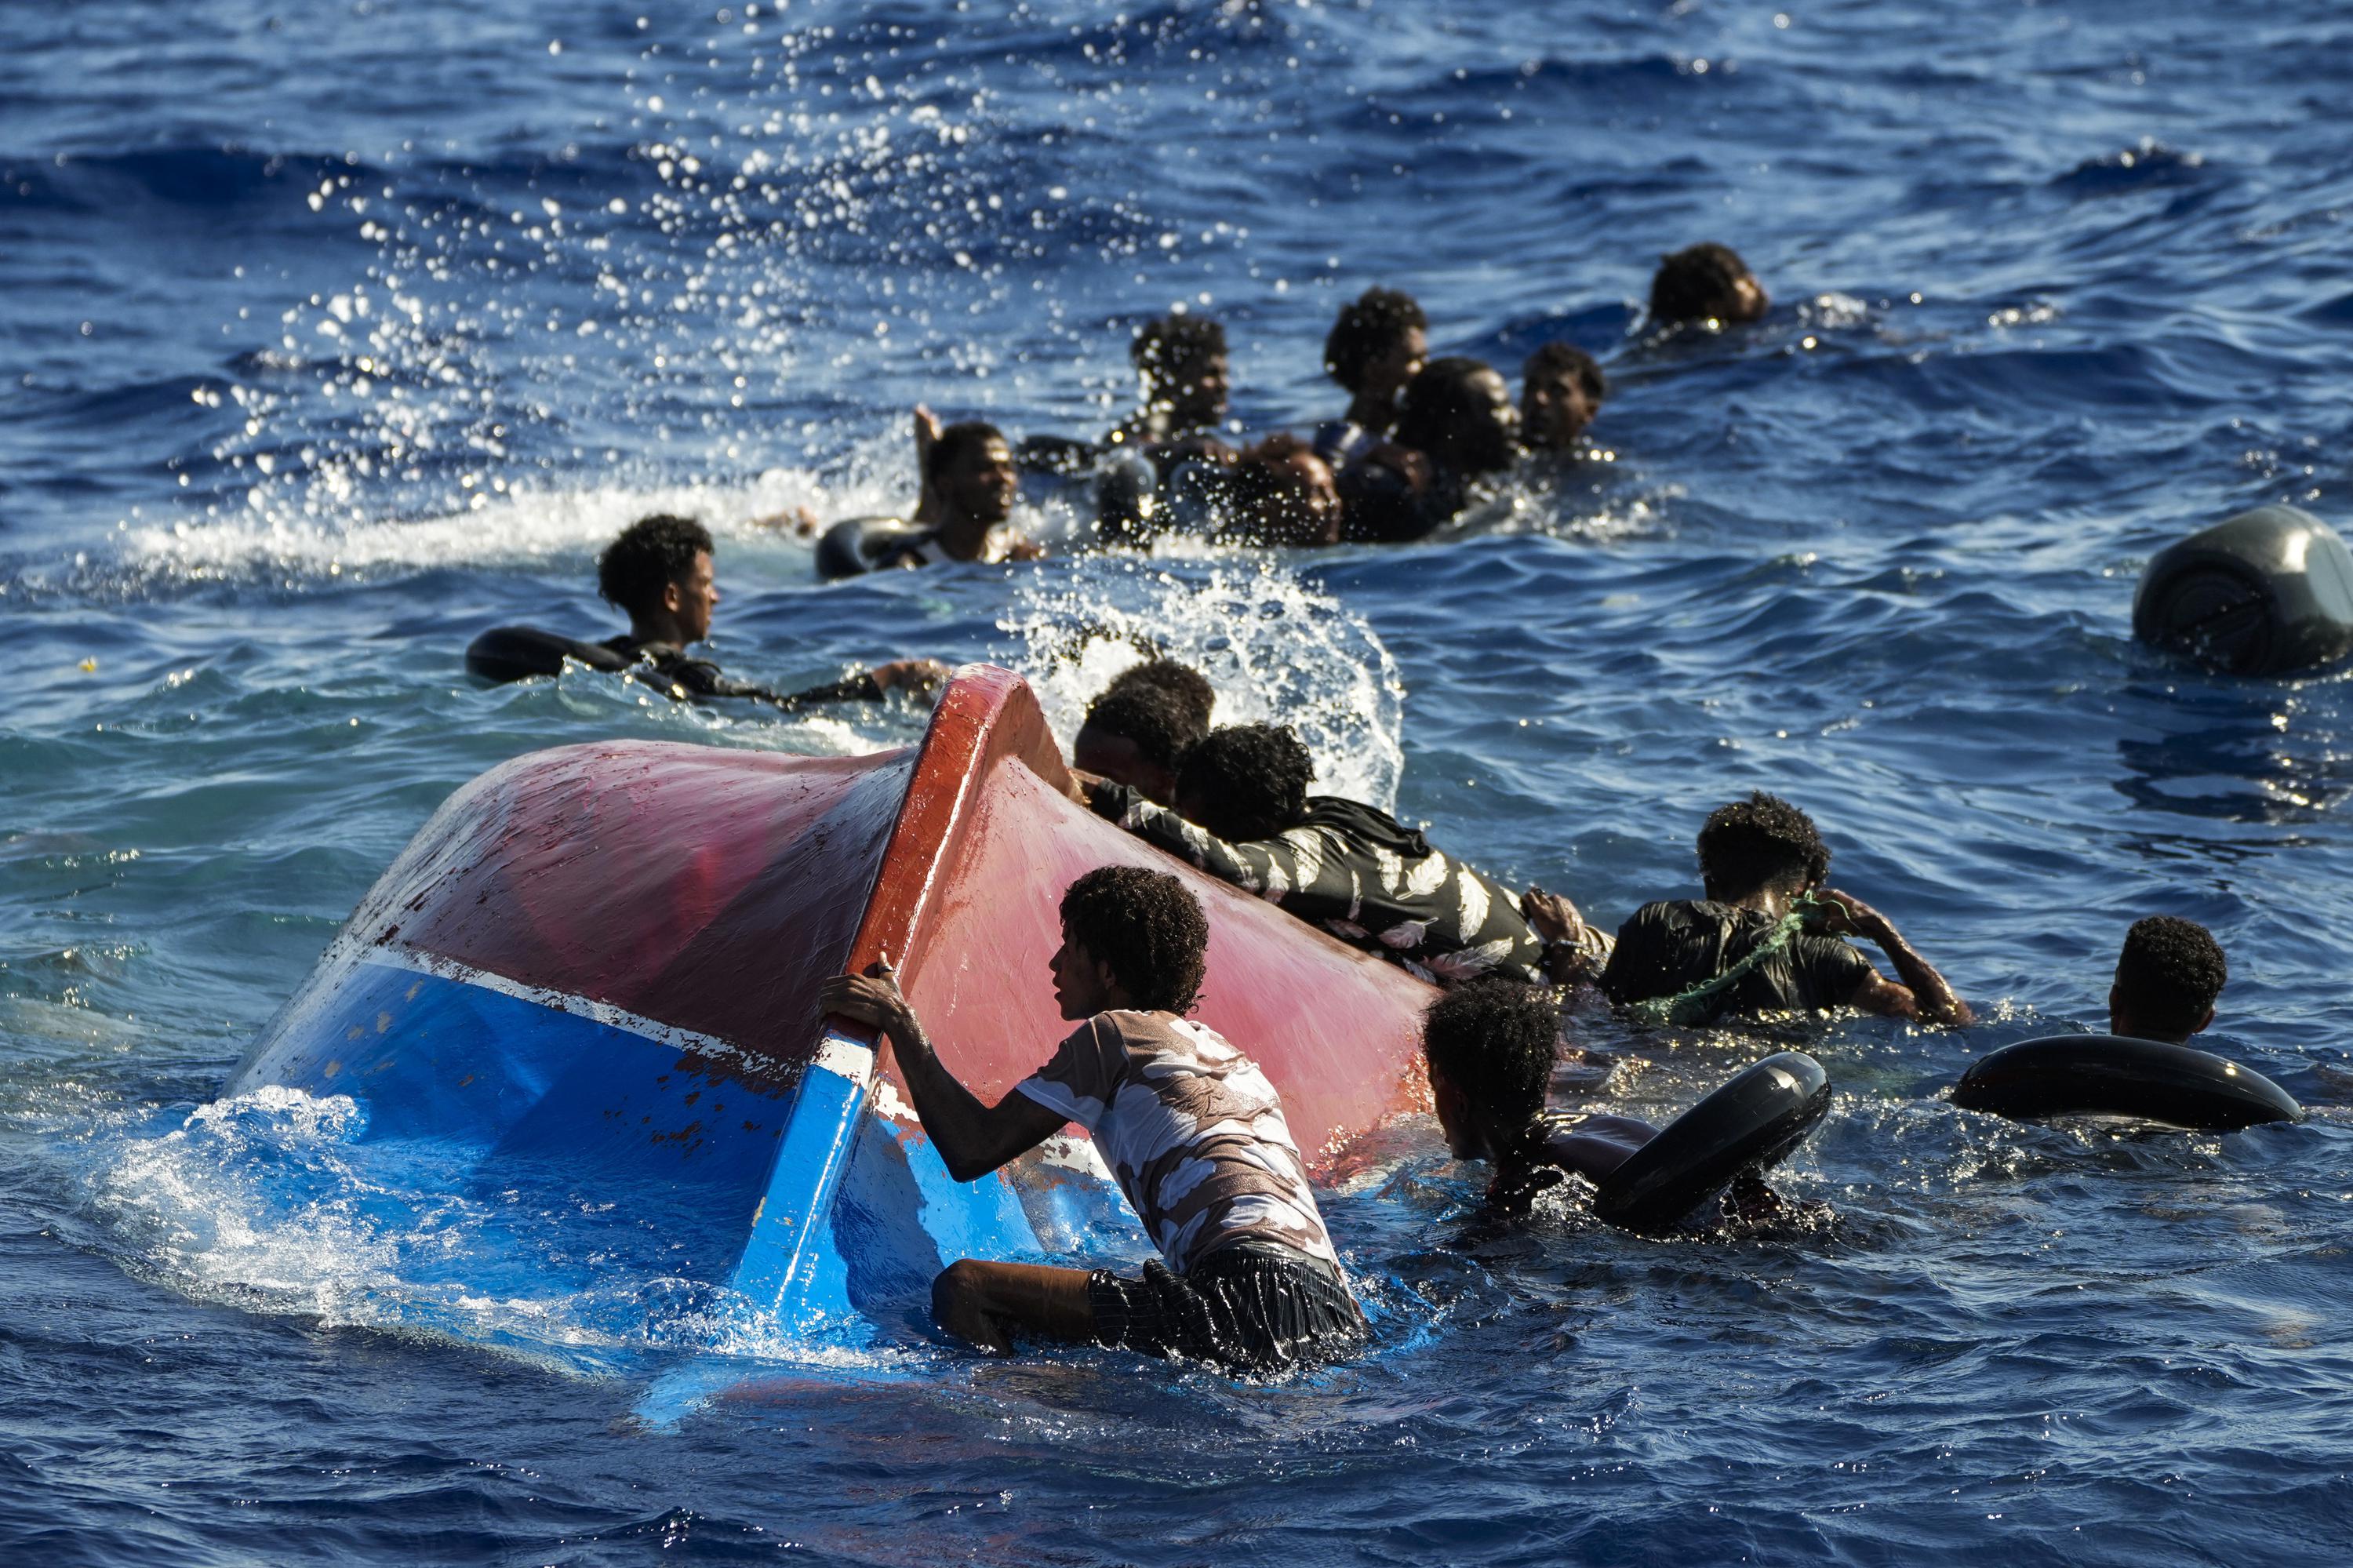 Life Support: Search and Rescue in the Mediterranean Sea